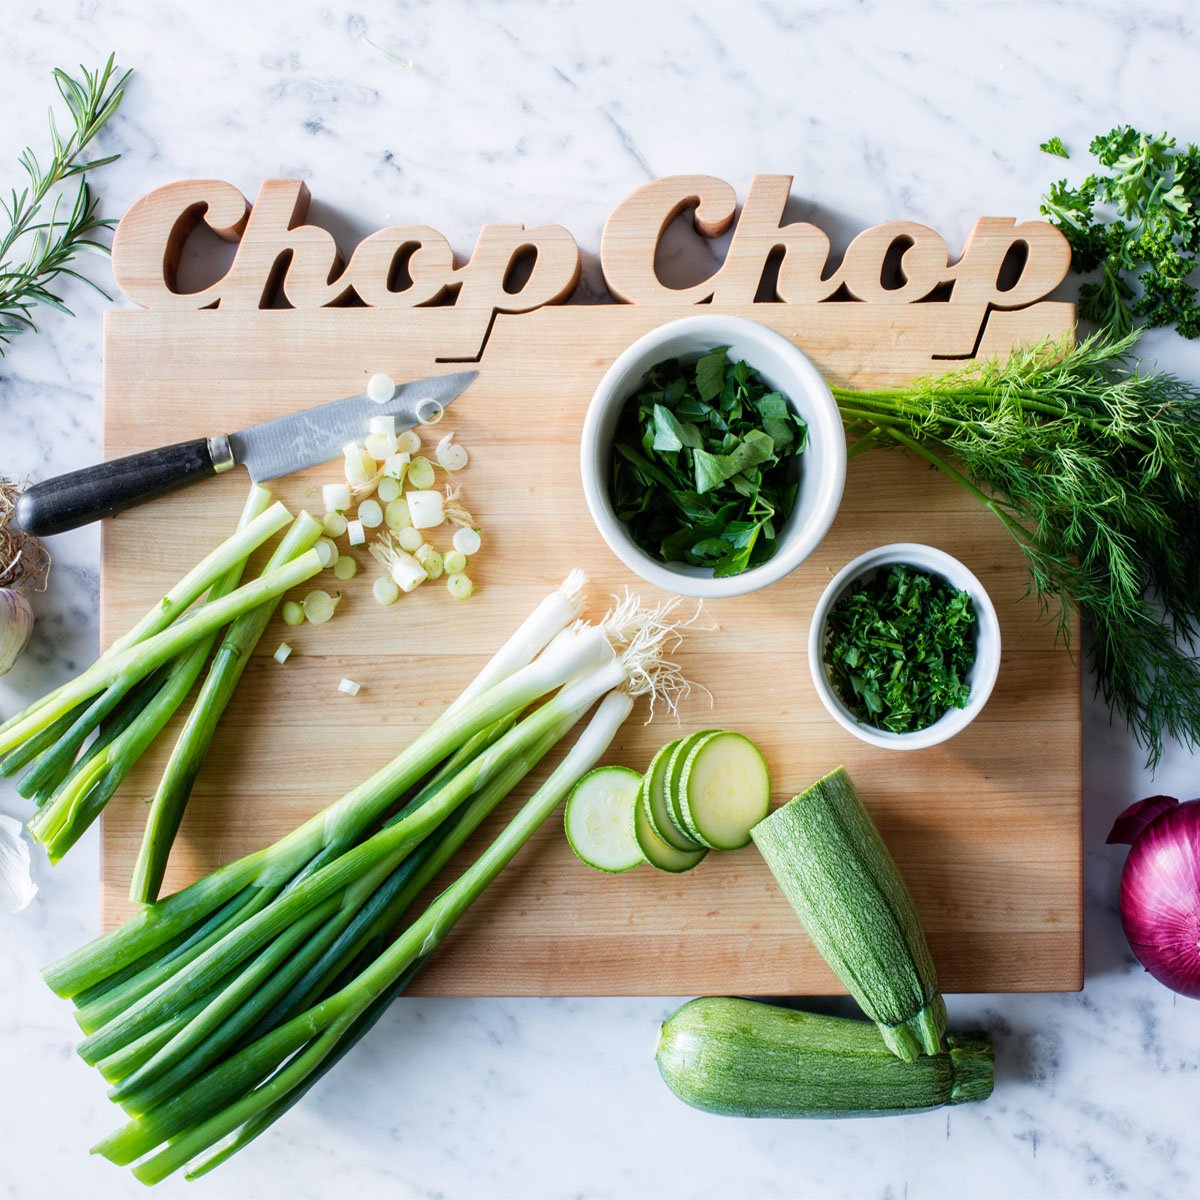 Cool cutting boards - has the words Chop Chop cut out on top, maple wood